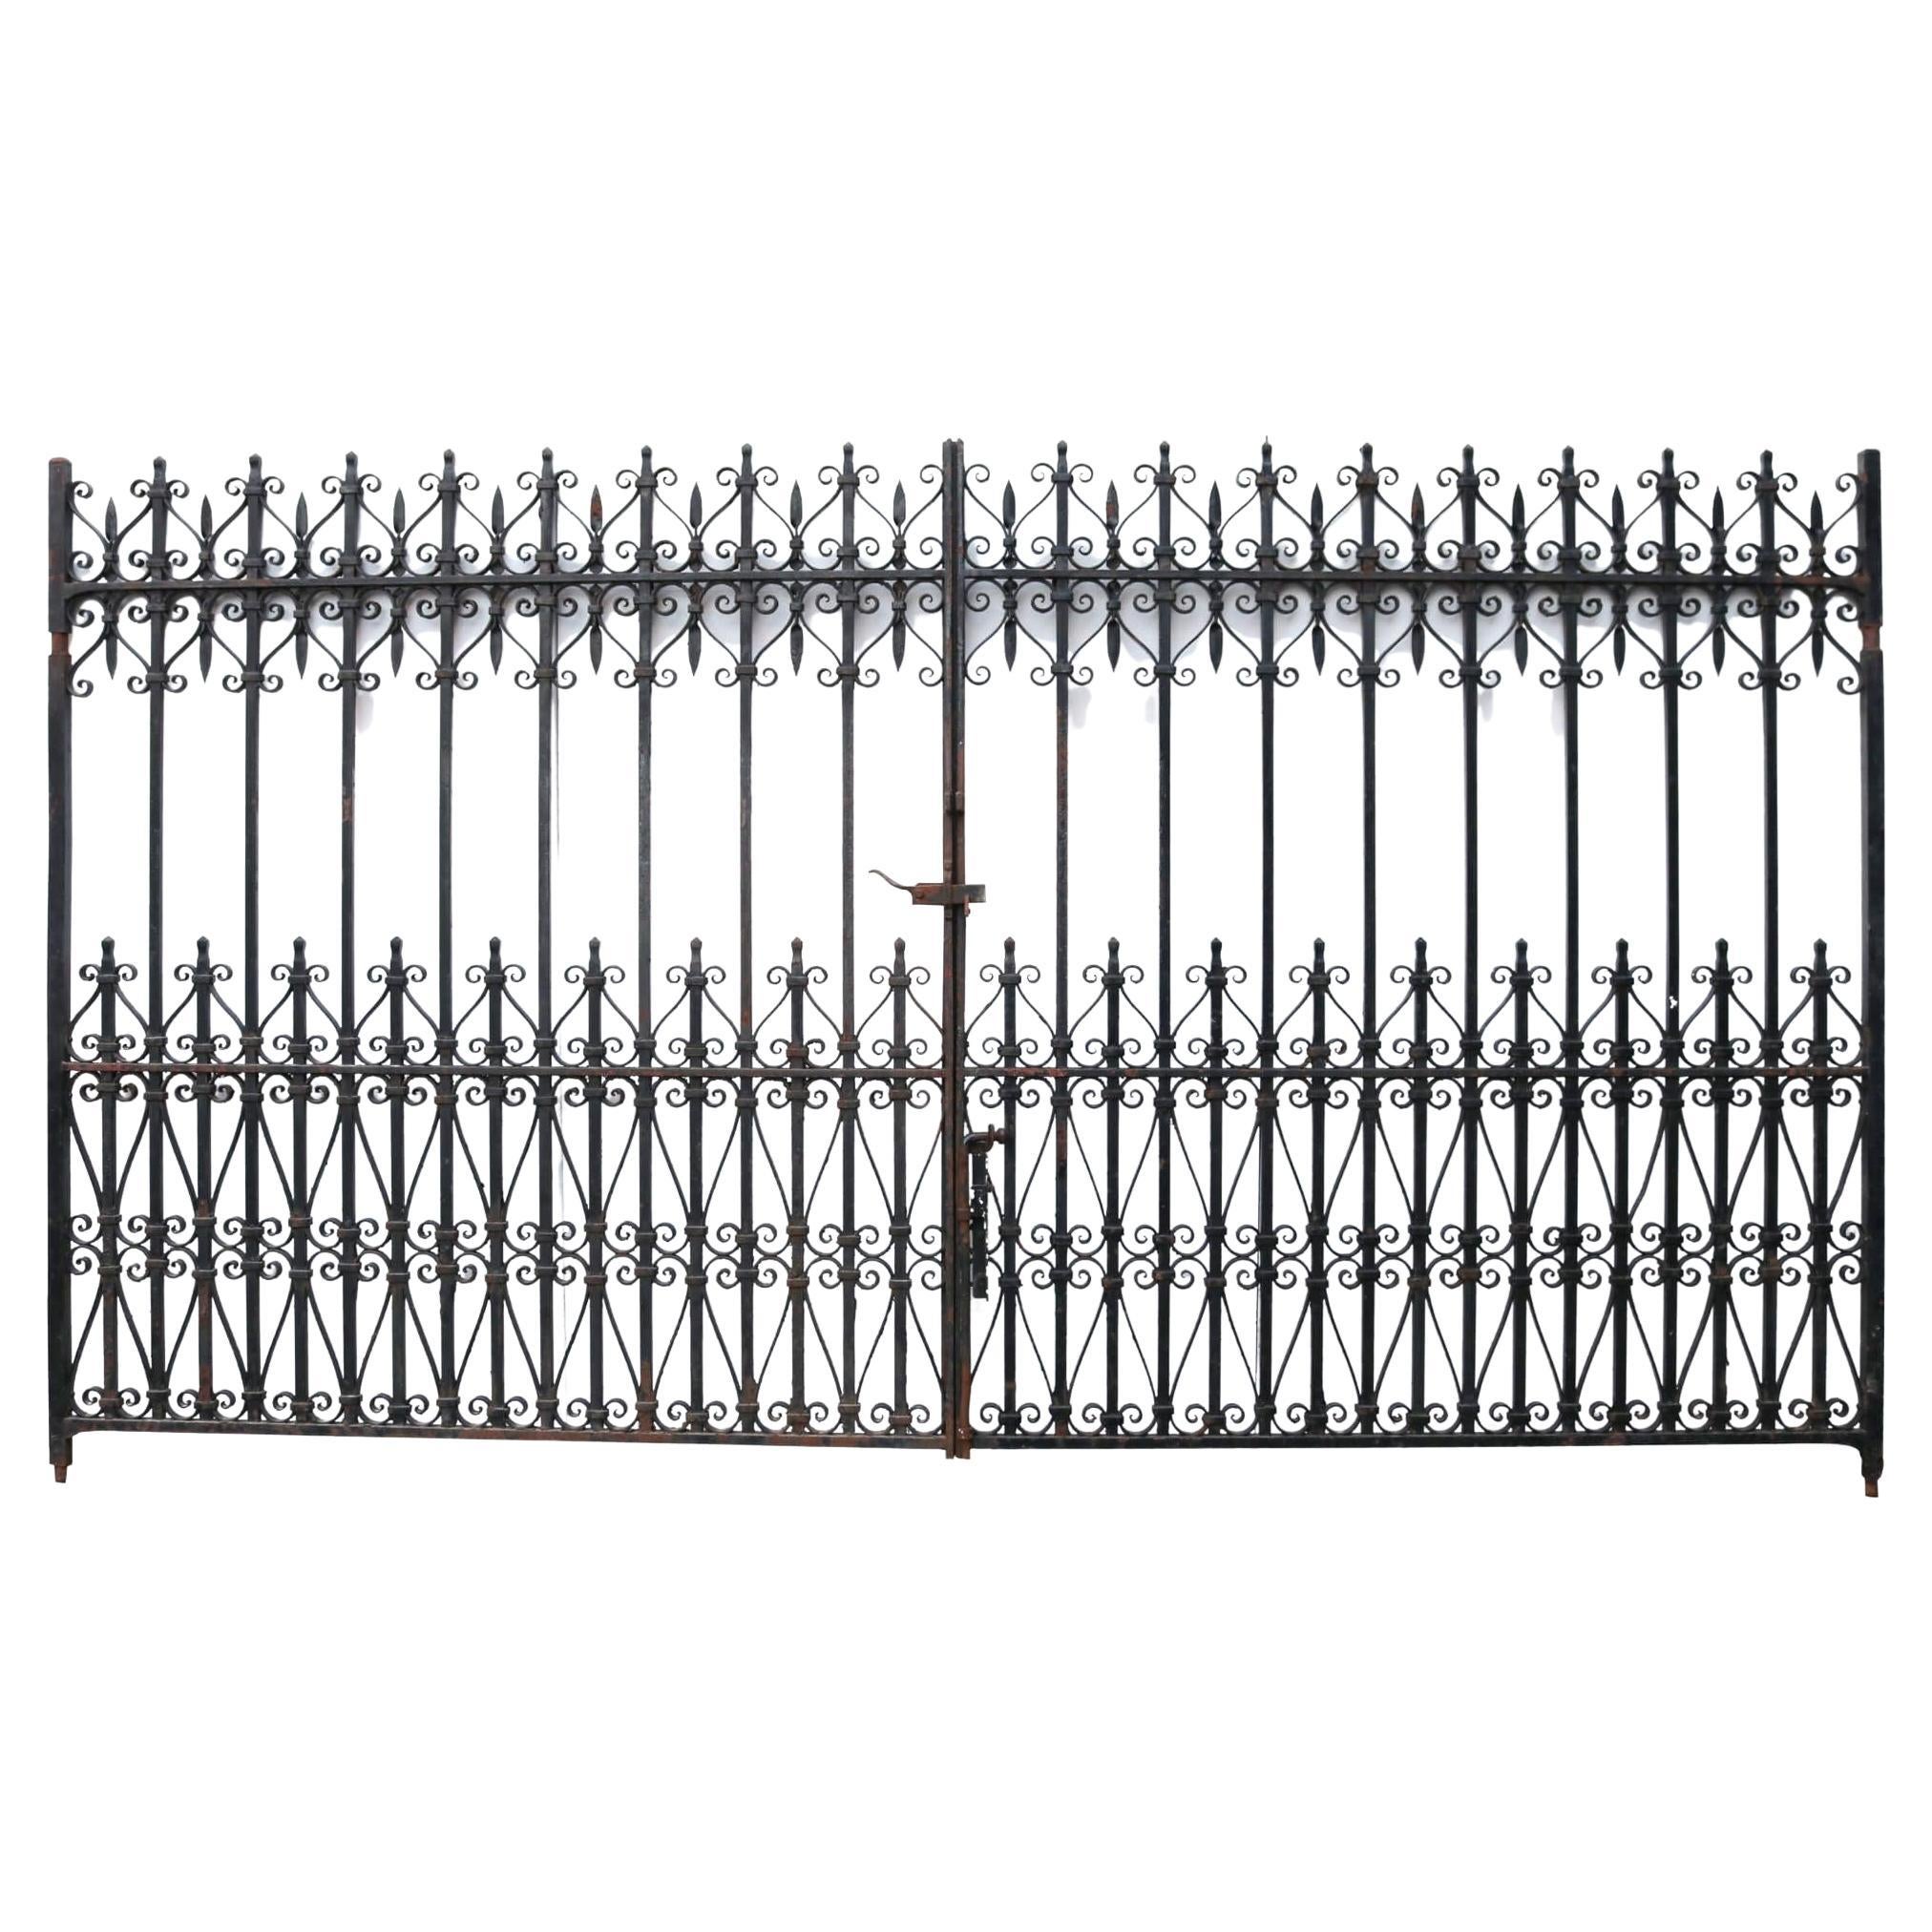 Ornate Pair of Driveway Gates in Wrought Iron 318 cm (10’4″) For Sale